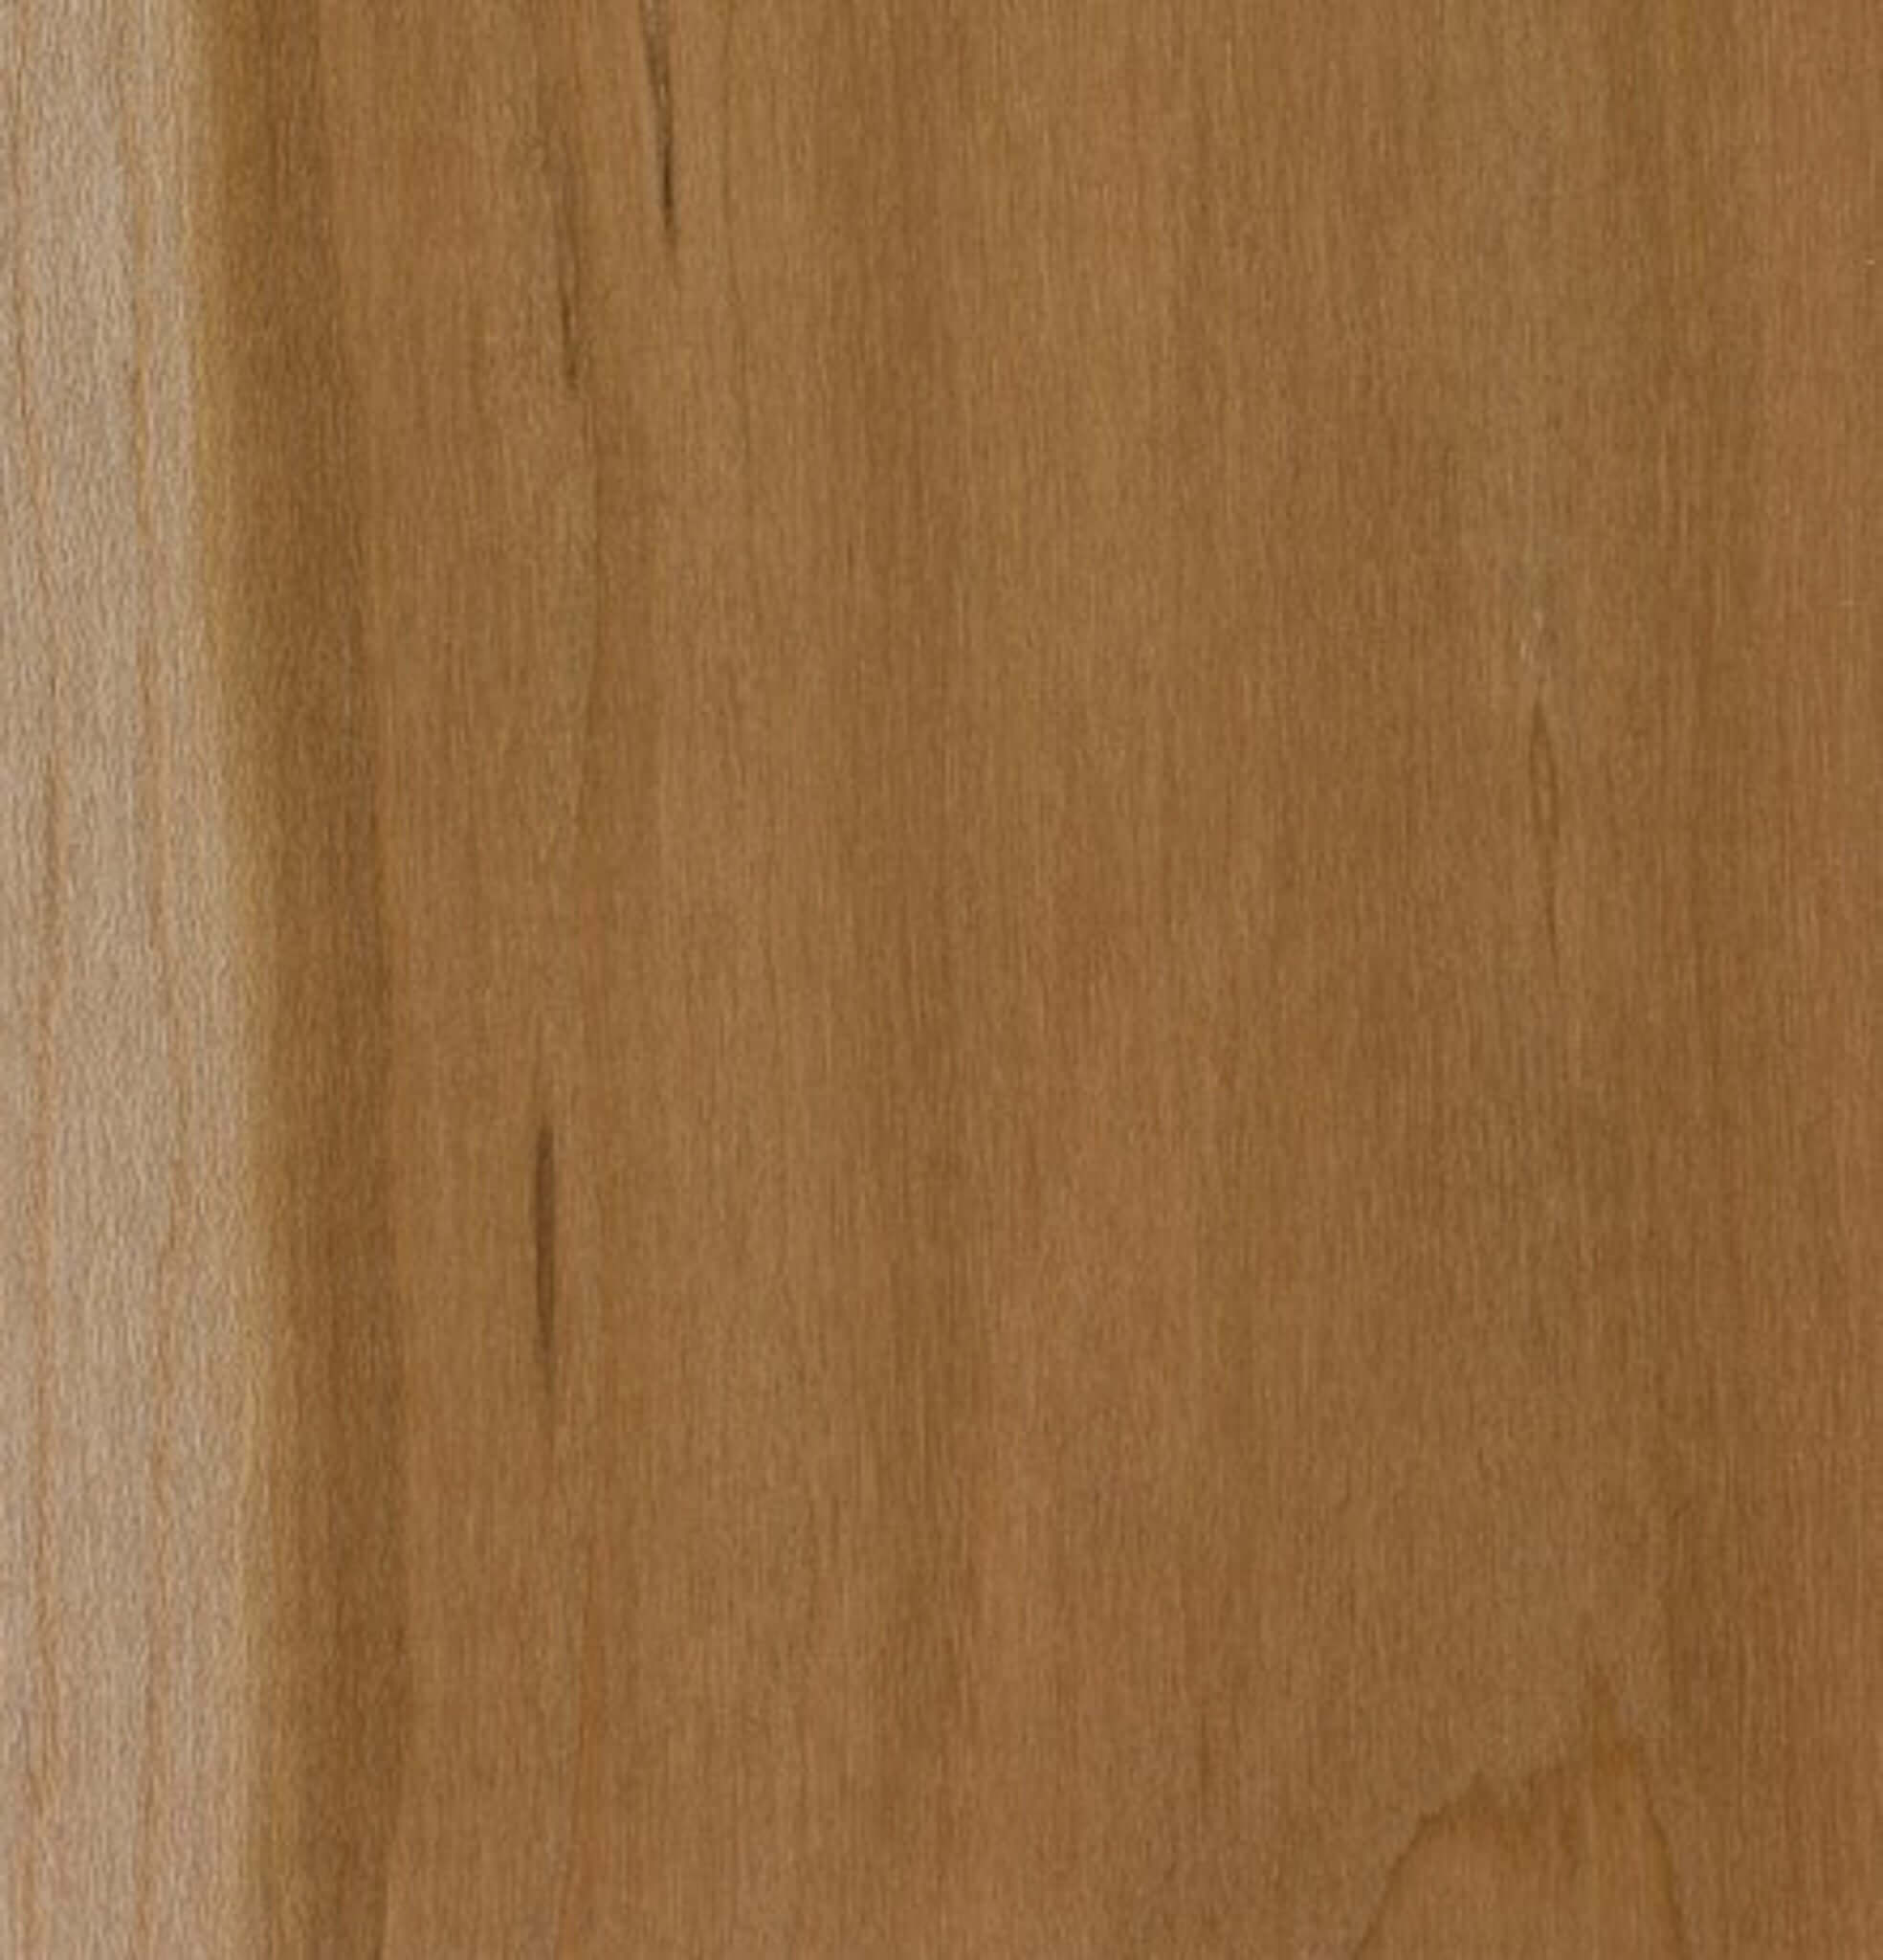 a sample of cherry wood